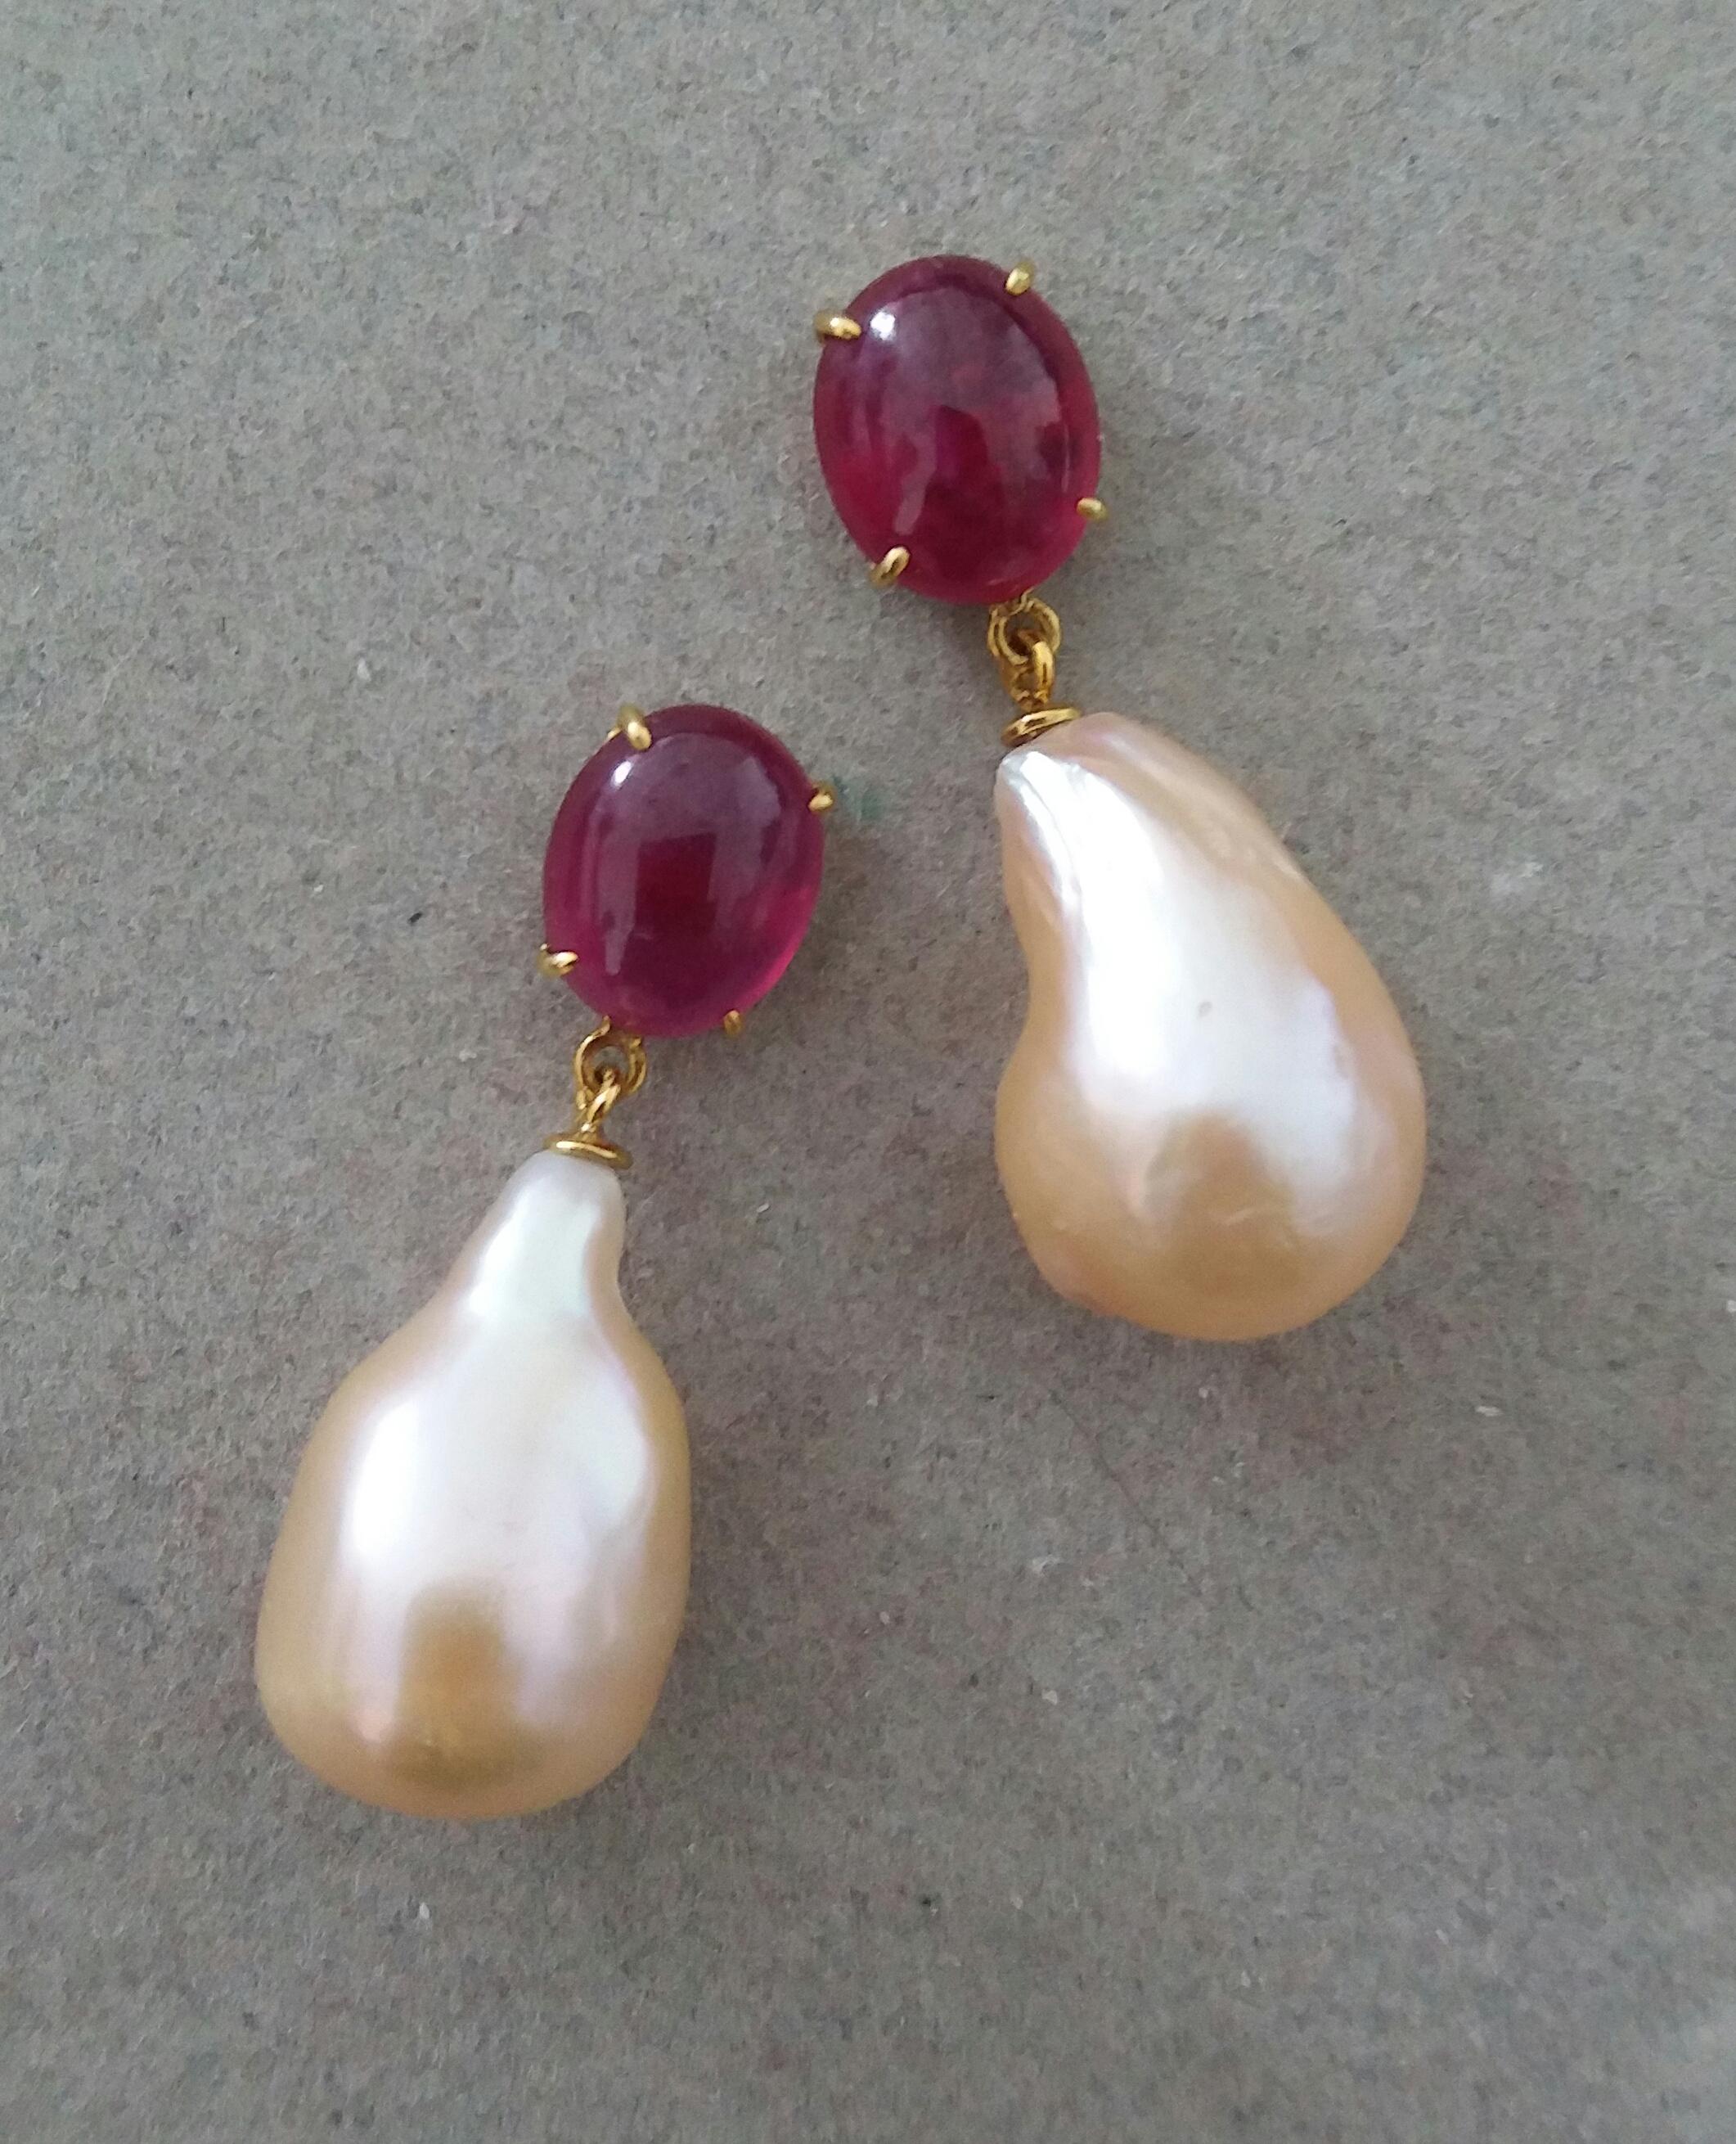 Big Size Pear Shape Cream Color Pearls Oval Ruby Cabochon 14 Karat Gold Earrings 3